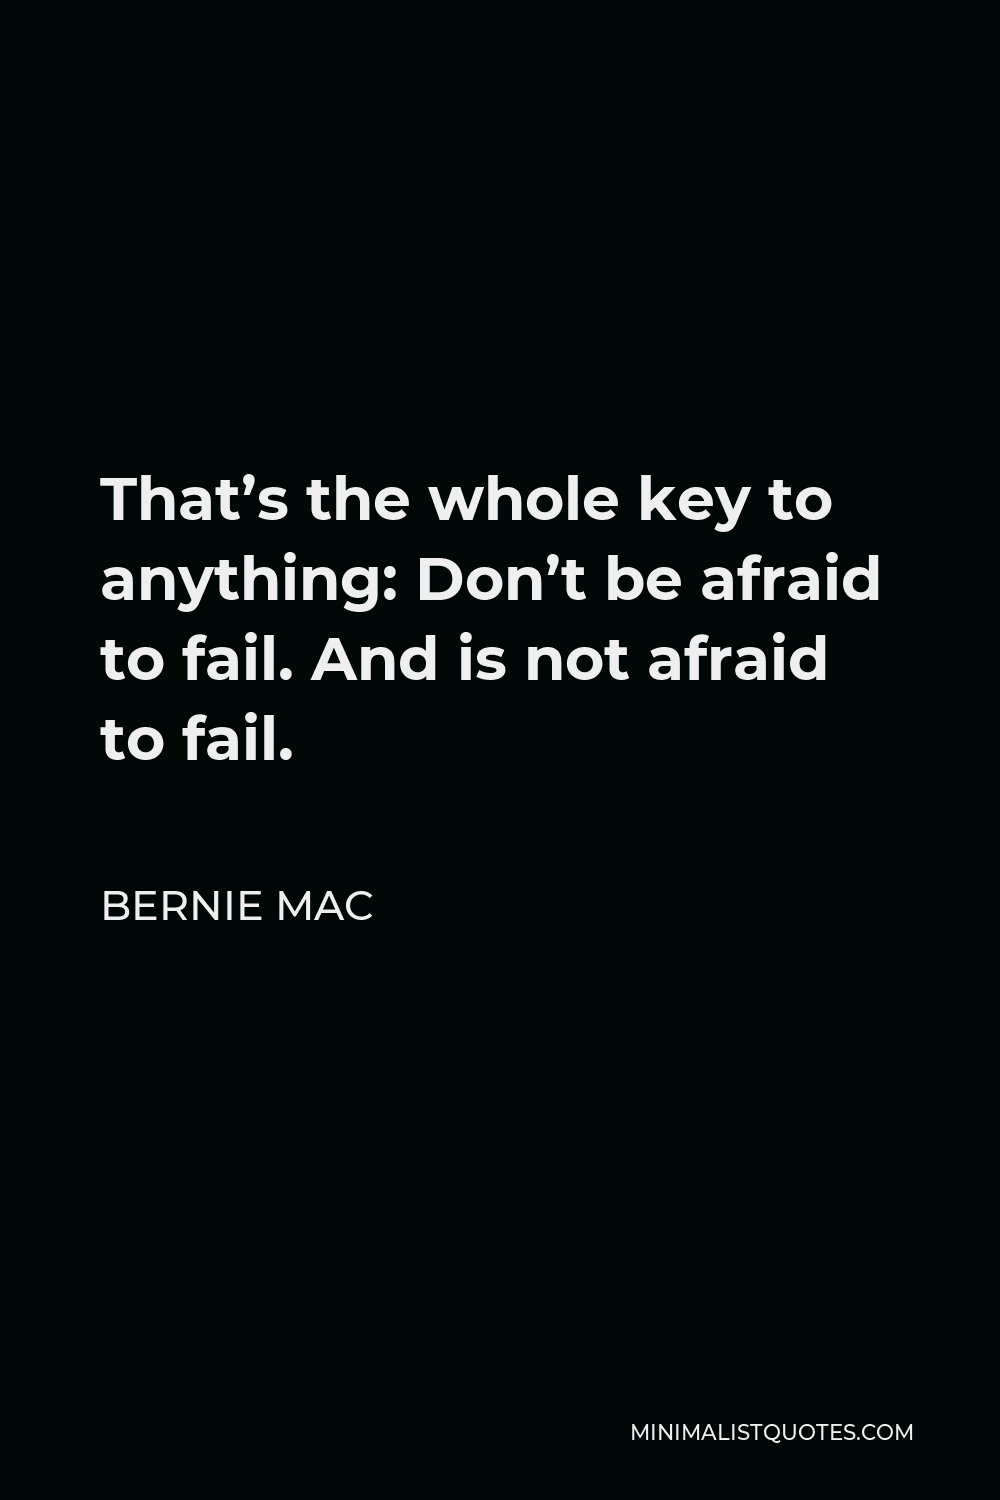 Bernie Mac Quote - That’s the whole key to anything: Don’t be afraid to fail. And is not afraid to fail.